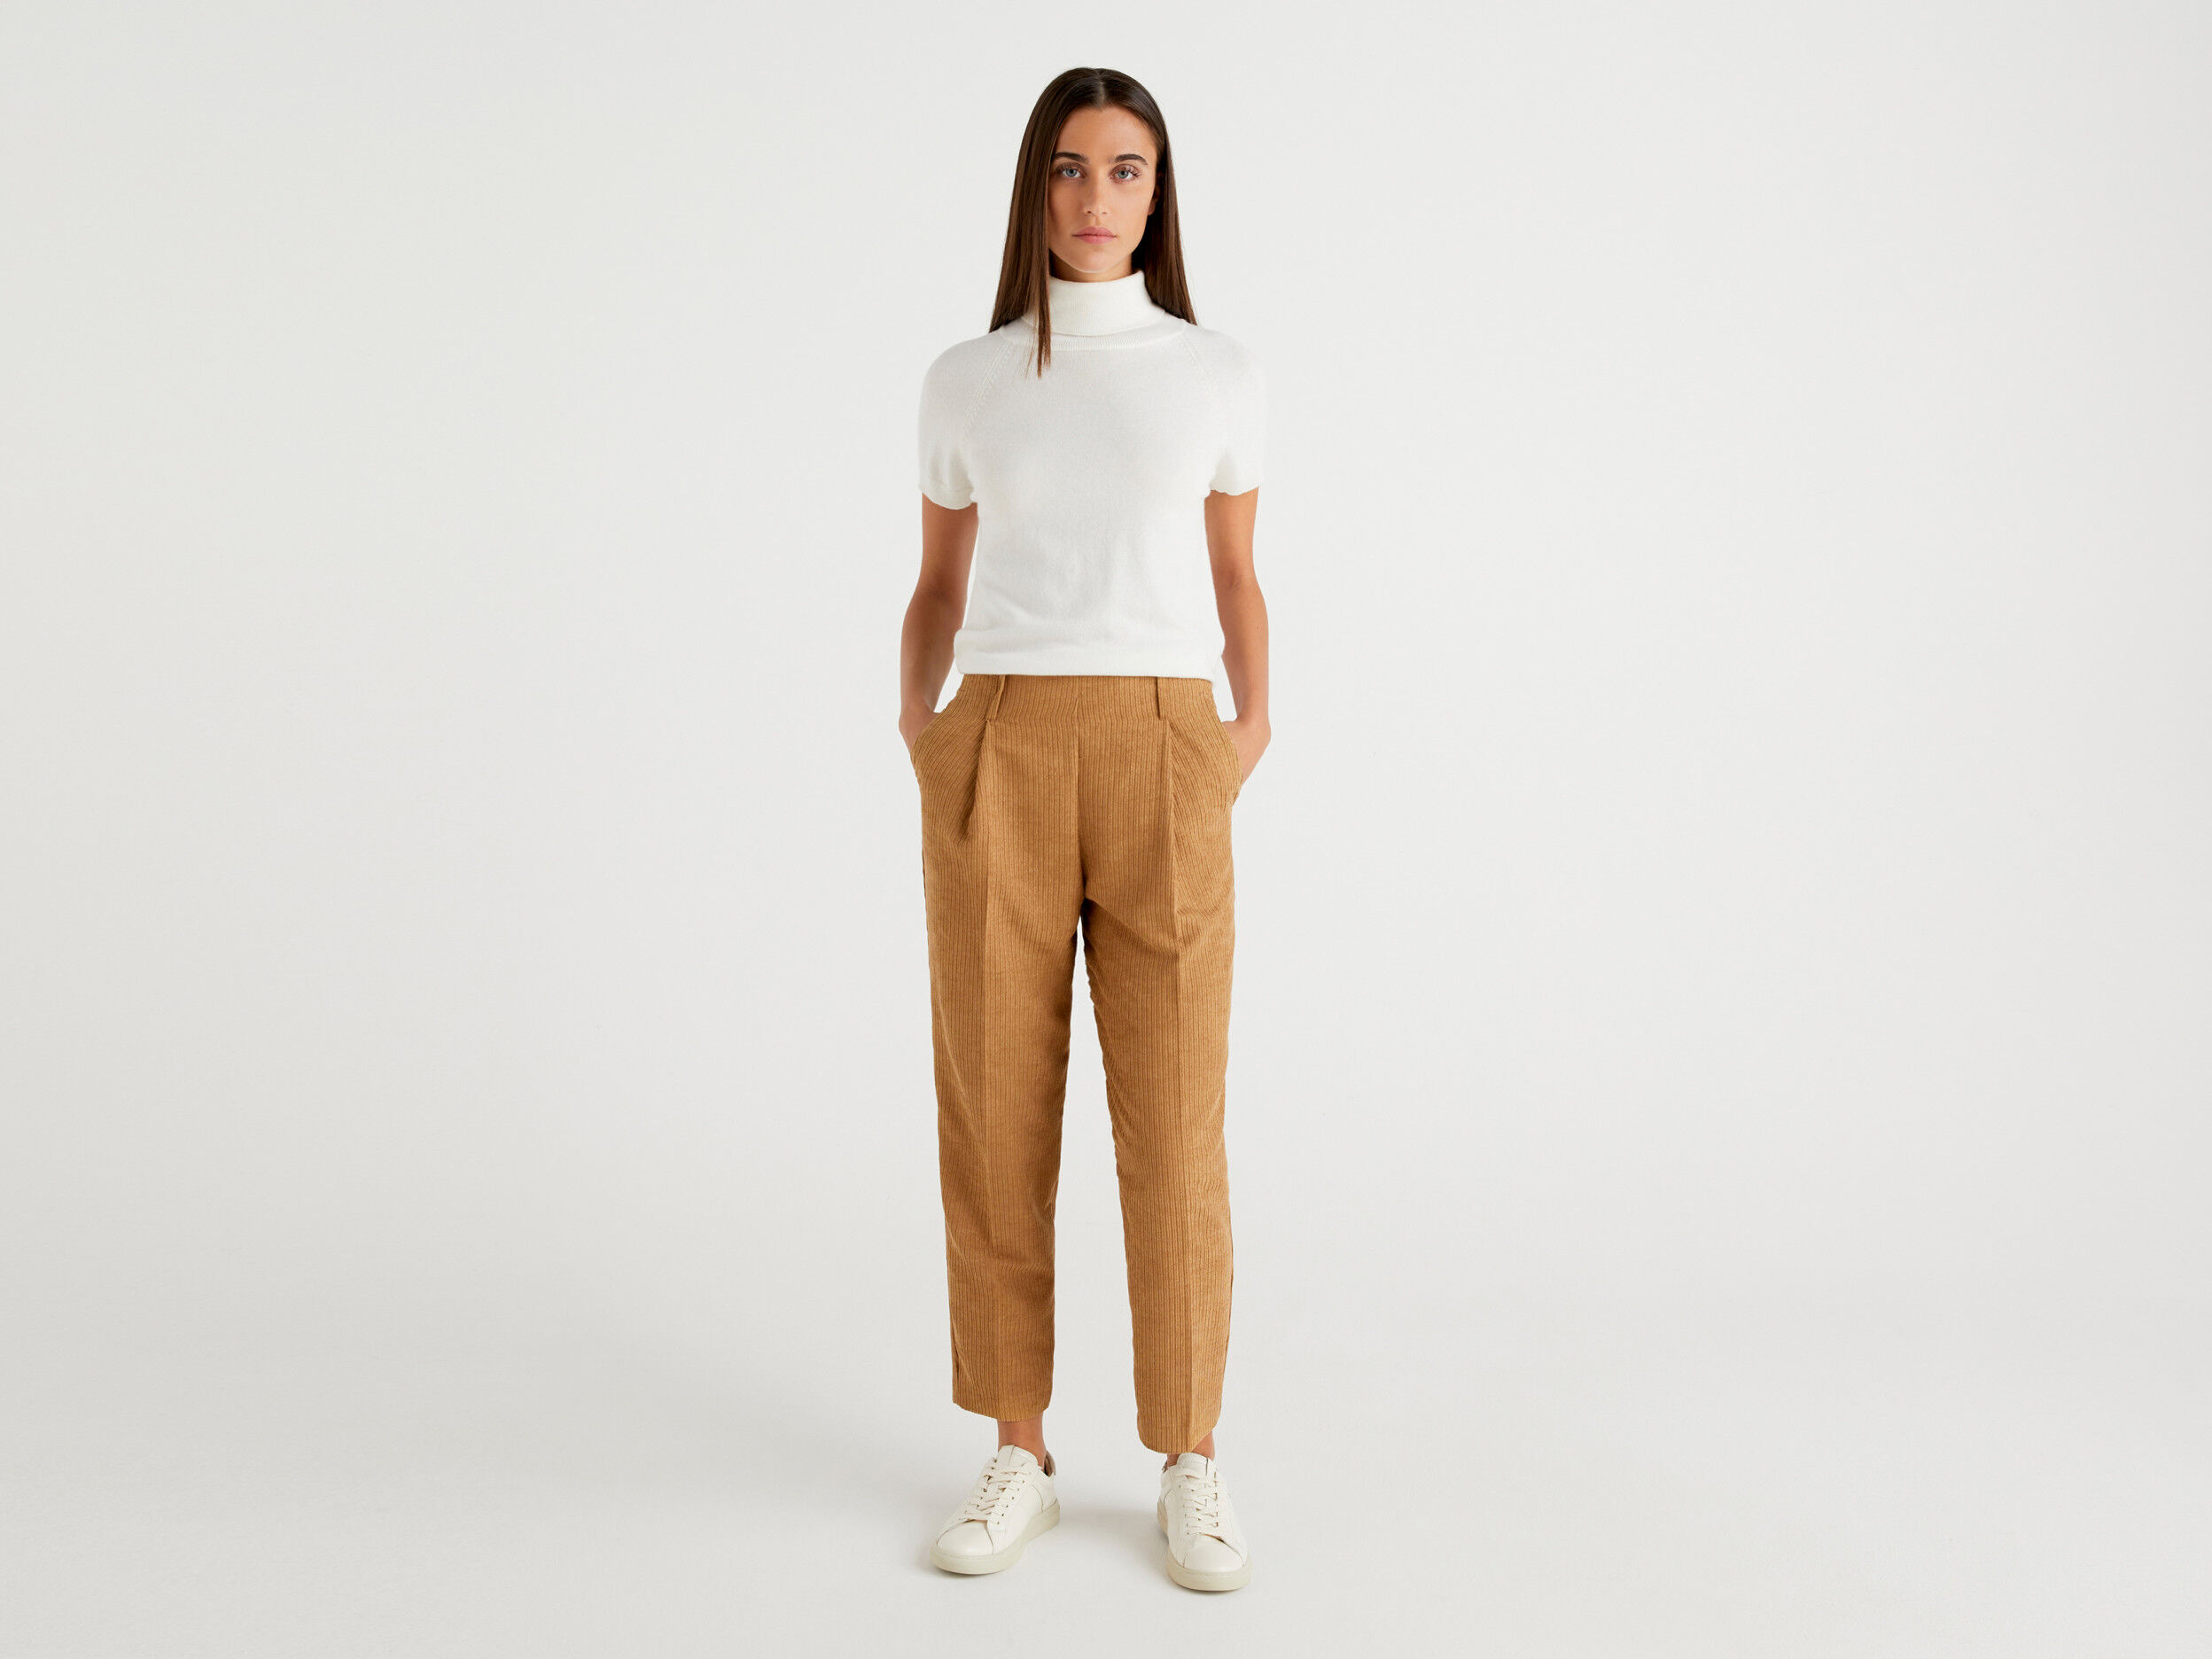 Buy J B Fashion Trousers Pants for Women | Trousers Pant for Women |  Western Trousers Pants for Women | Women Trousers Pant | Trousers Pantes  (JB-P-11-14) (S, Beige) at Amazon.in